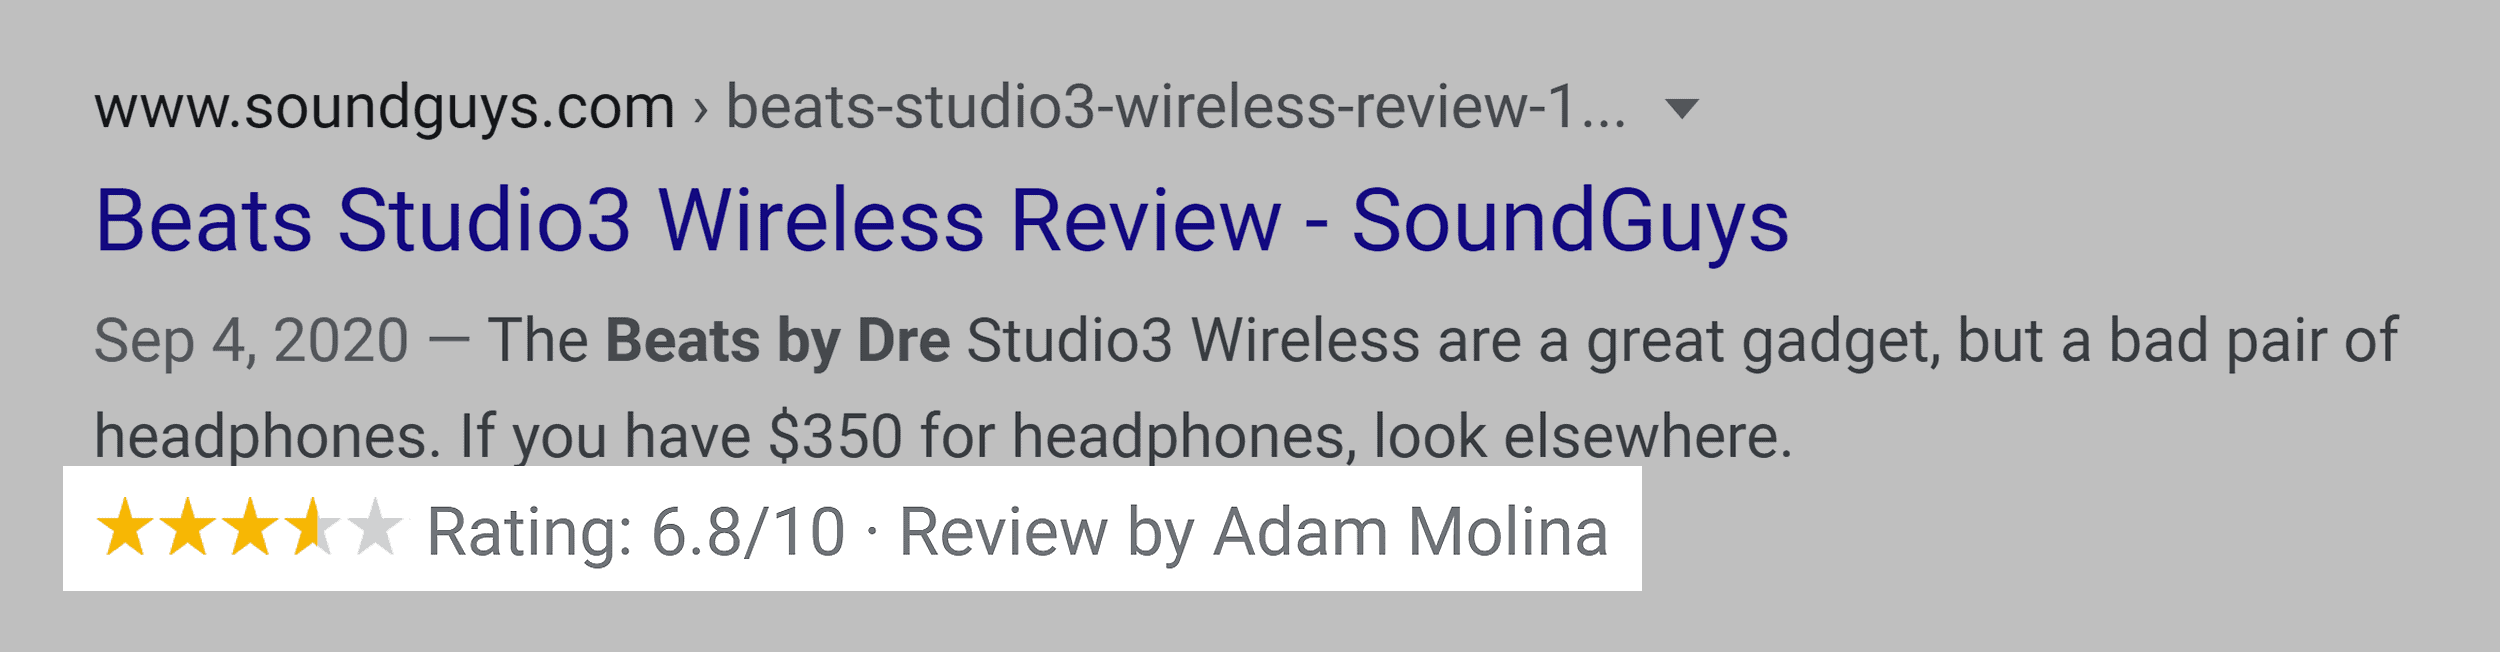 Review Snippet